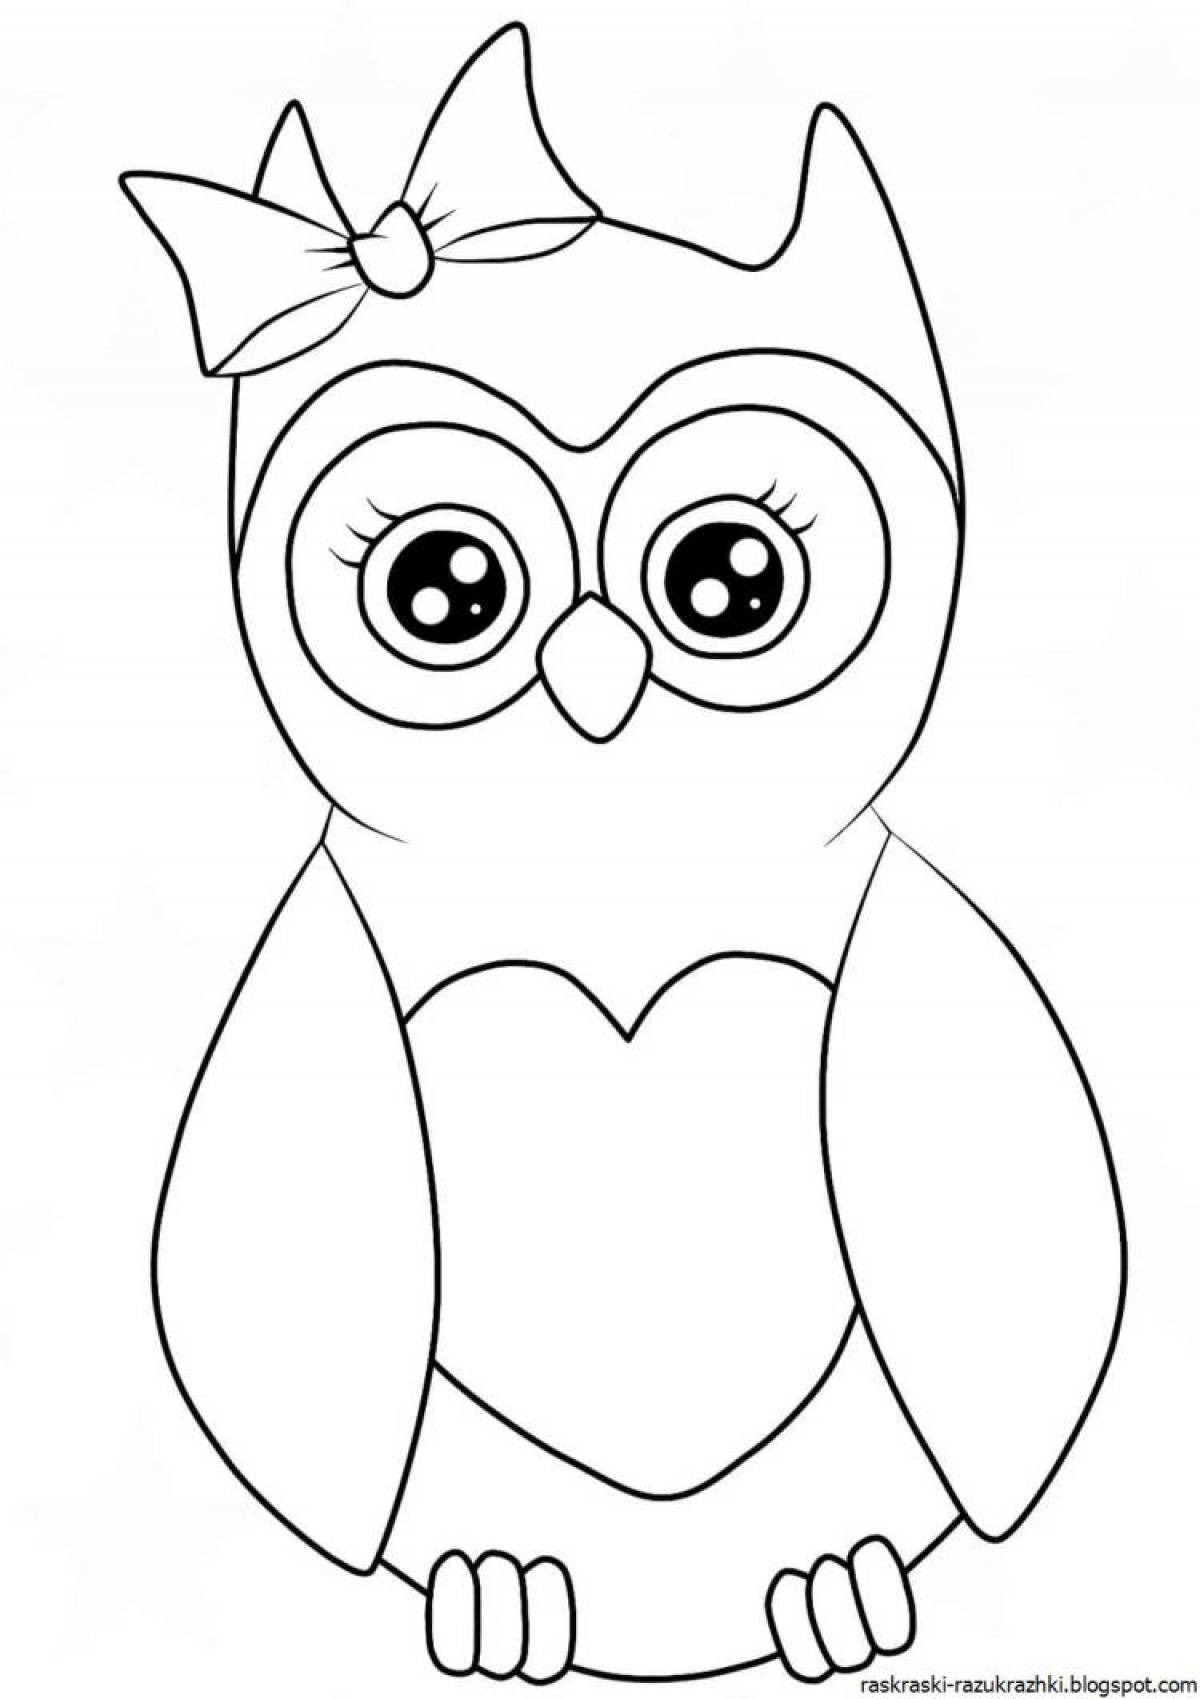 Funny owl coloring book for kids